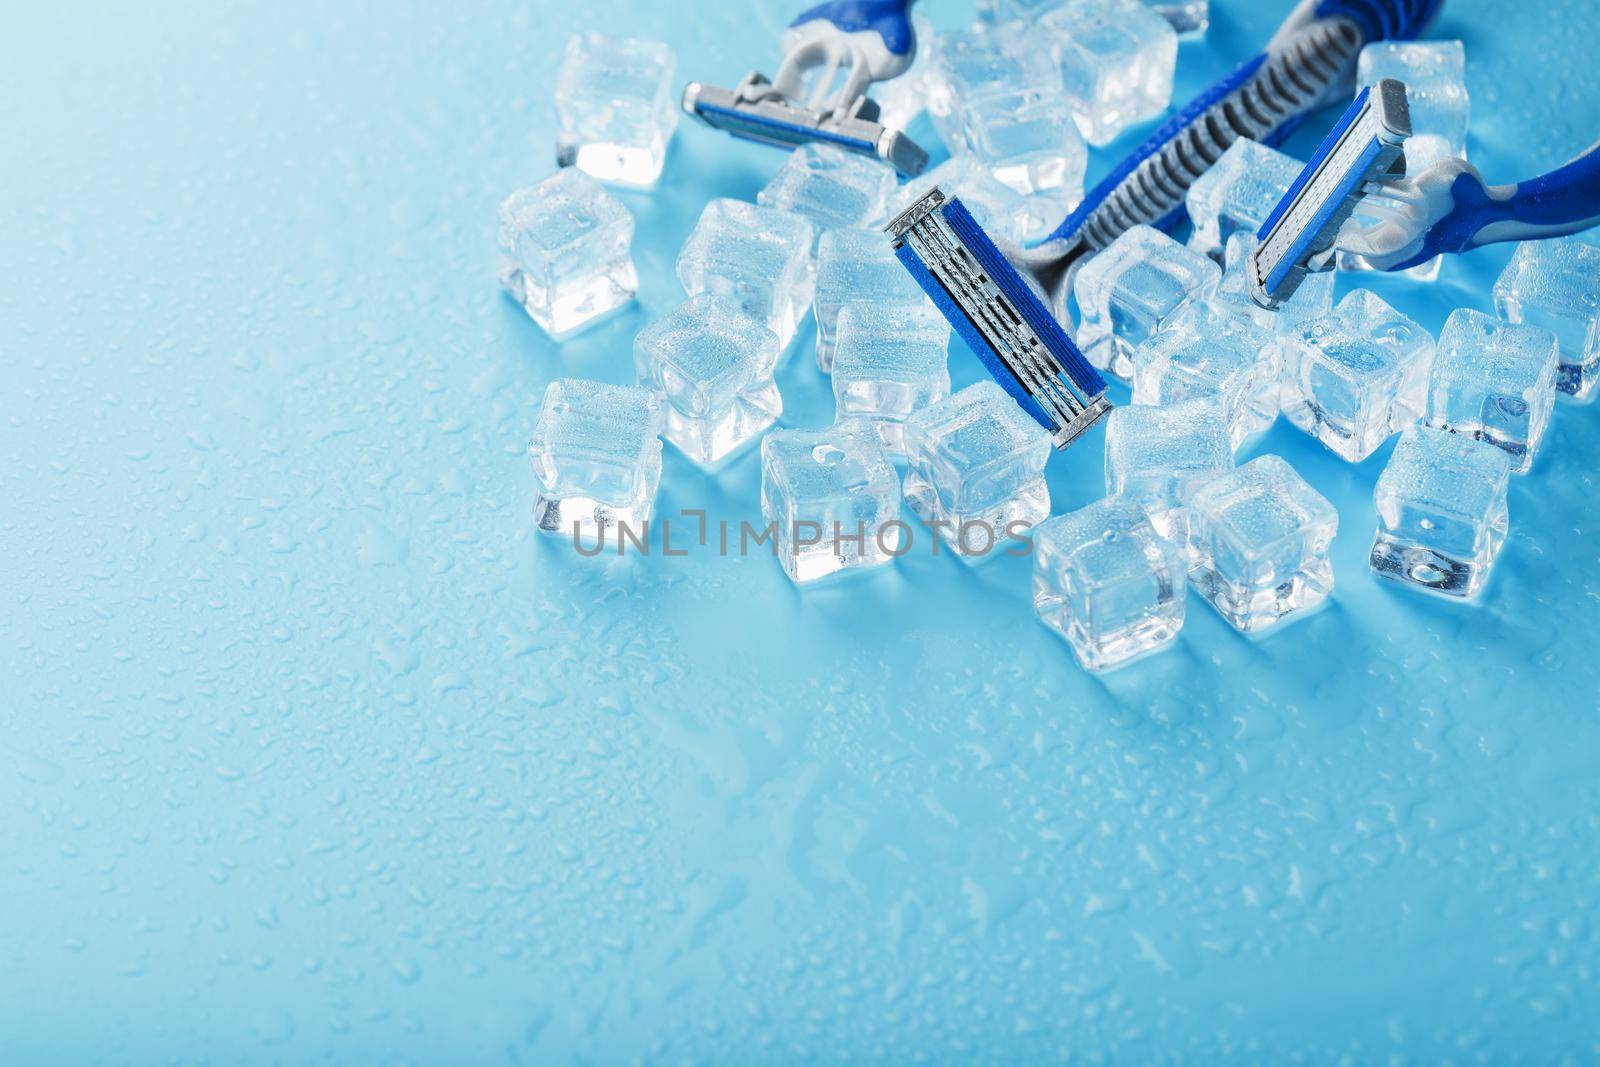 Refreshing shaving machines for the face against the background of frosty ice cubes by AlexGrec